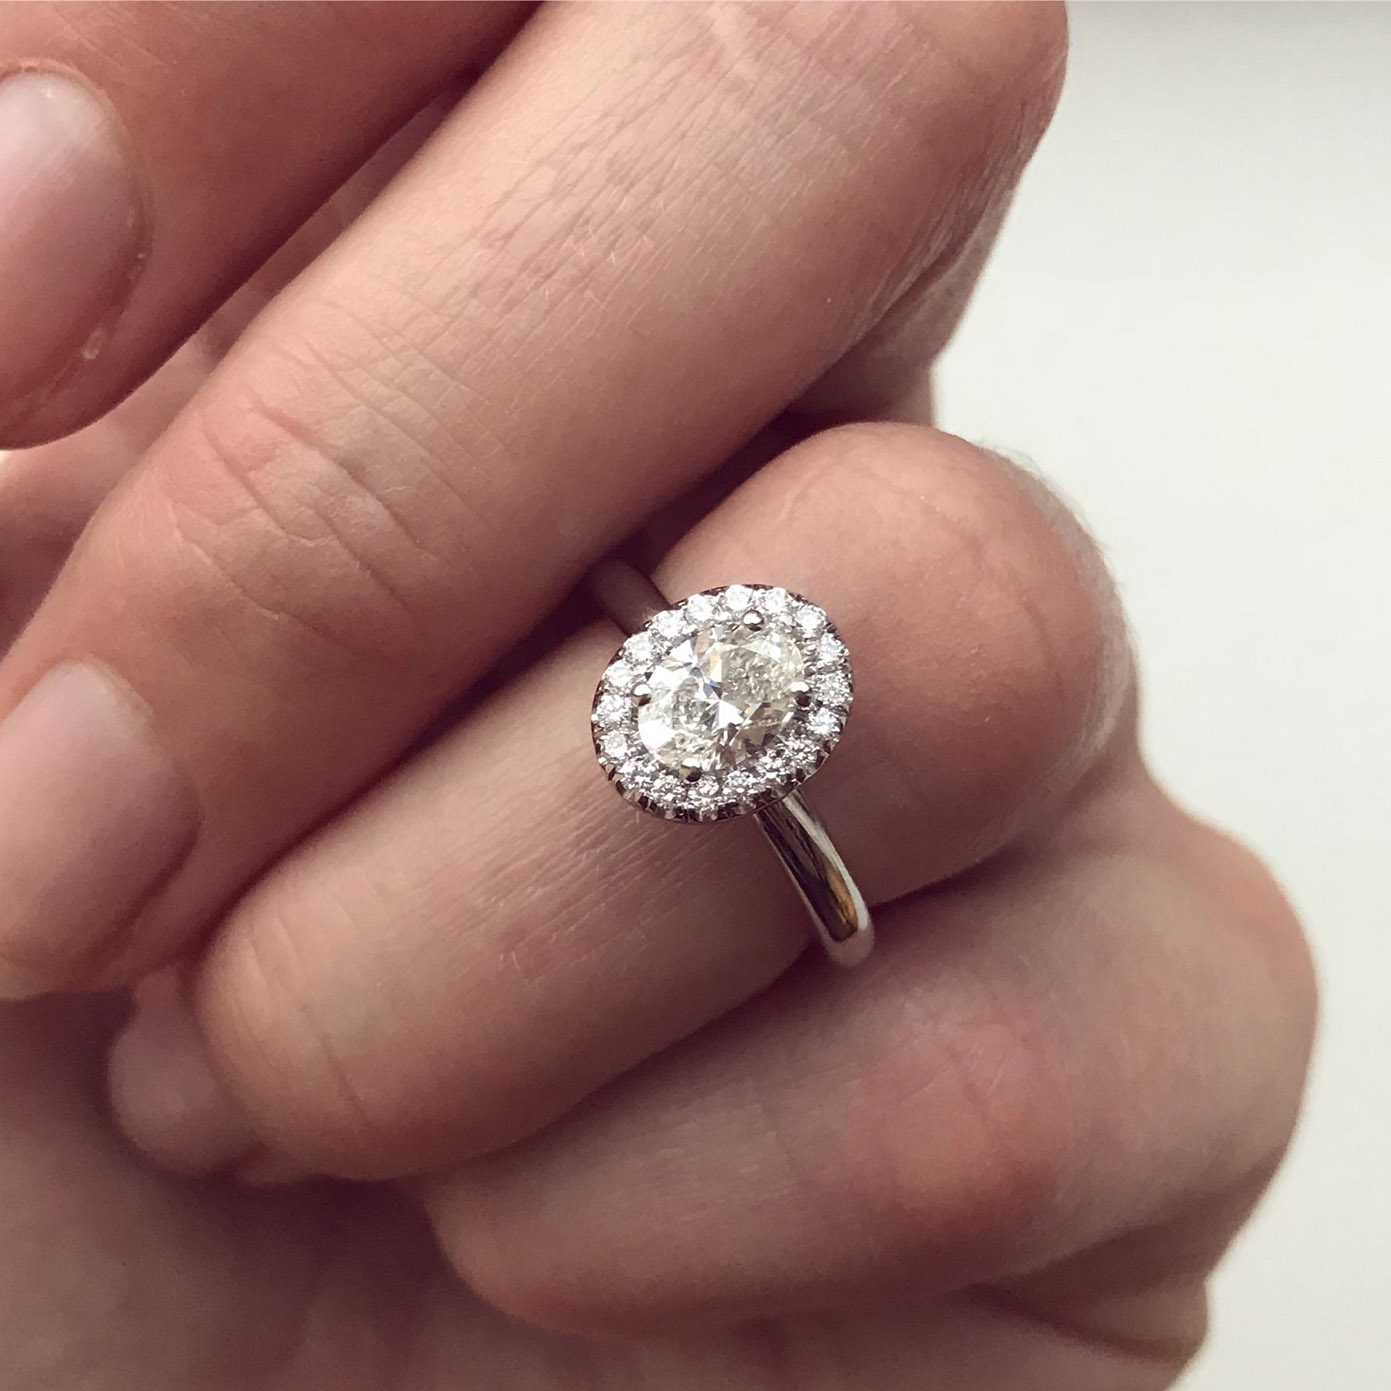 Opt for an Engagement Ring with an Oval Diamond